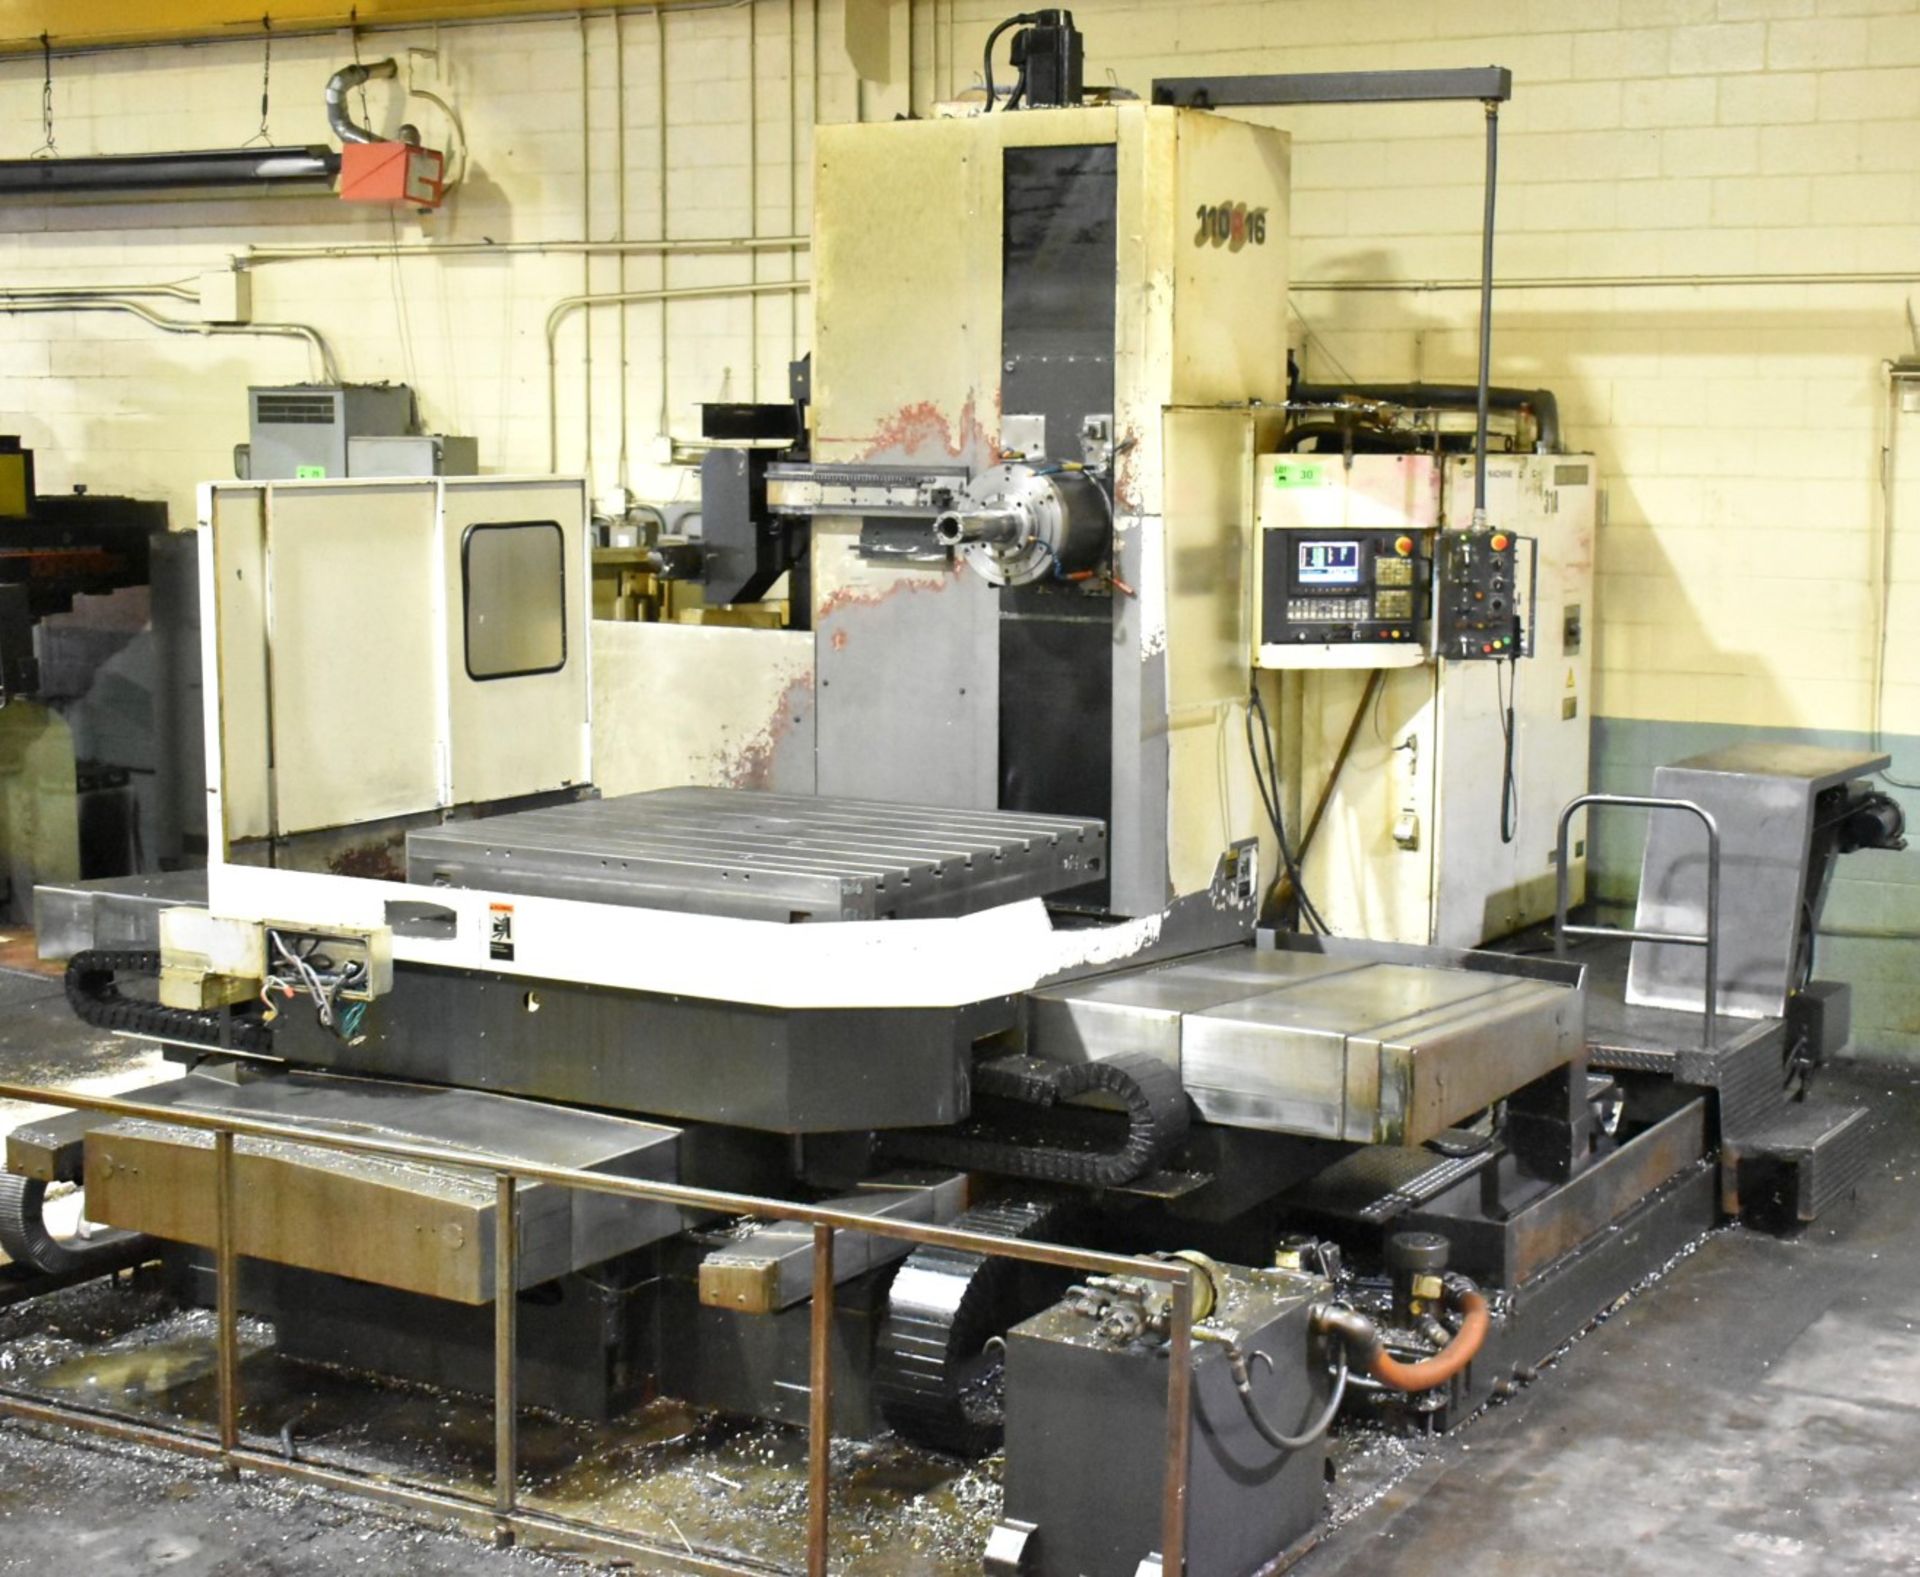 TOSHIBA BTD110 R16 CNC TABLE-TYPE HORIZONTAL BORING MILL WITH TOSNUC 888 CNC CONTROL, 4.3"